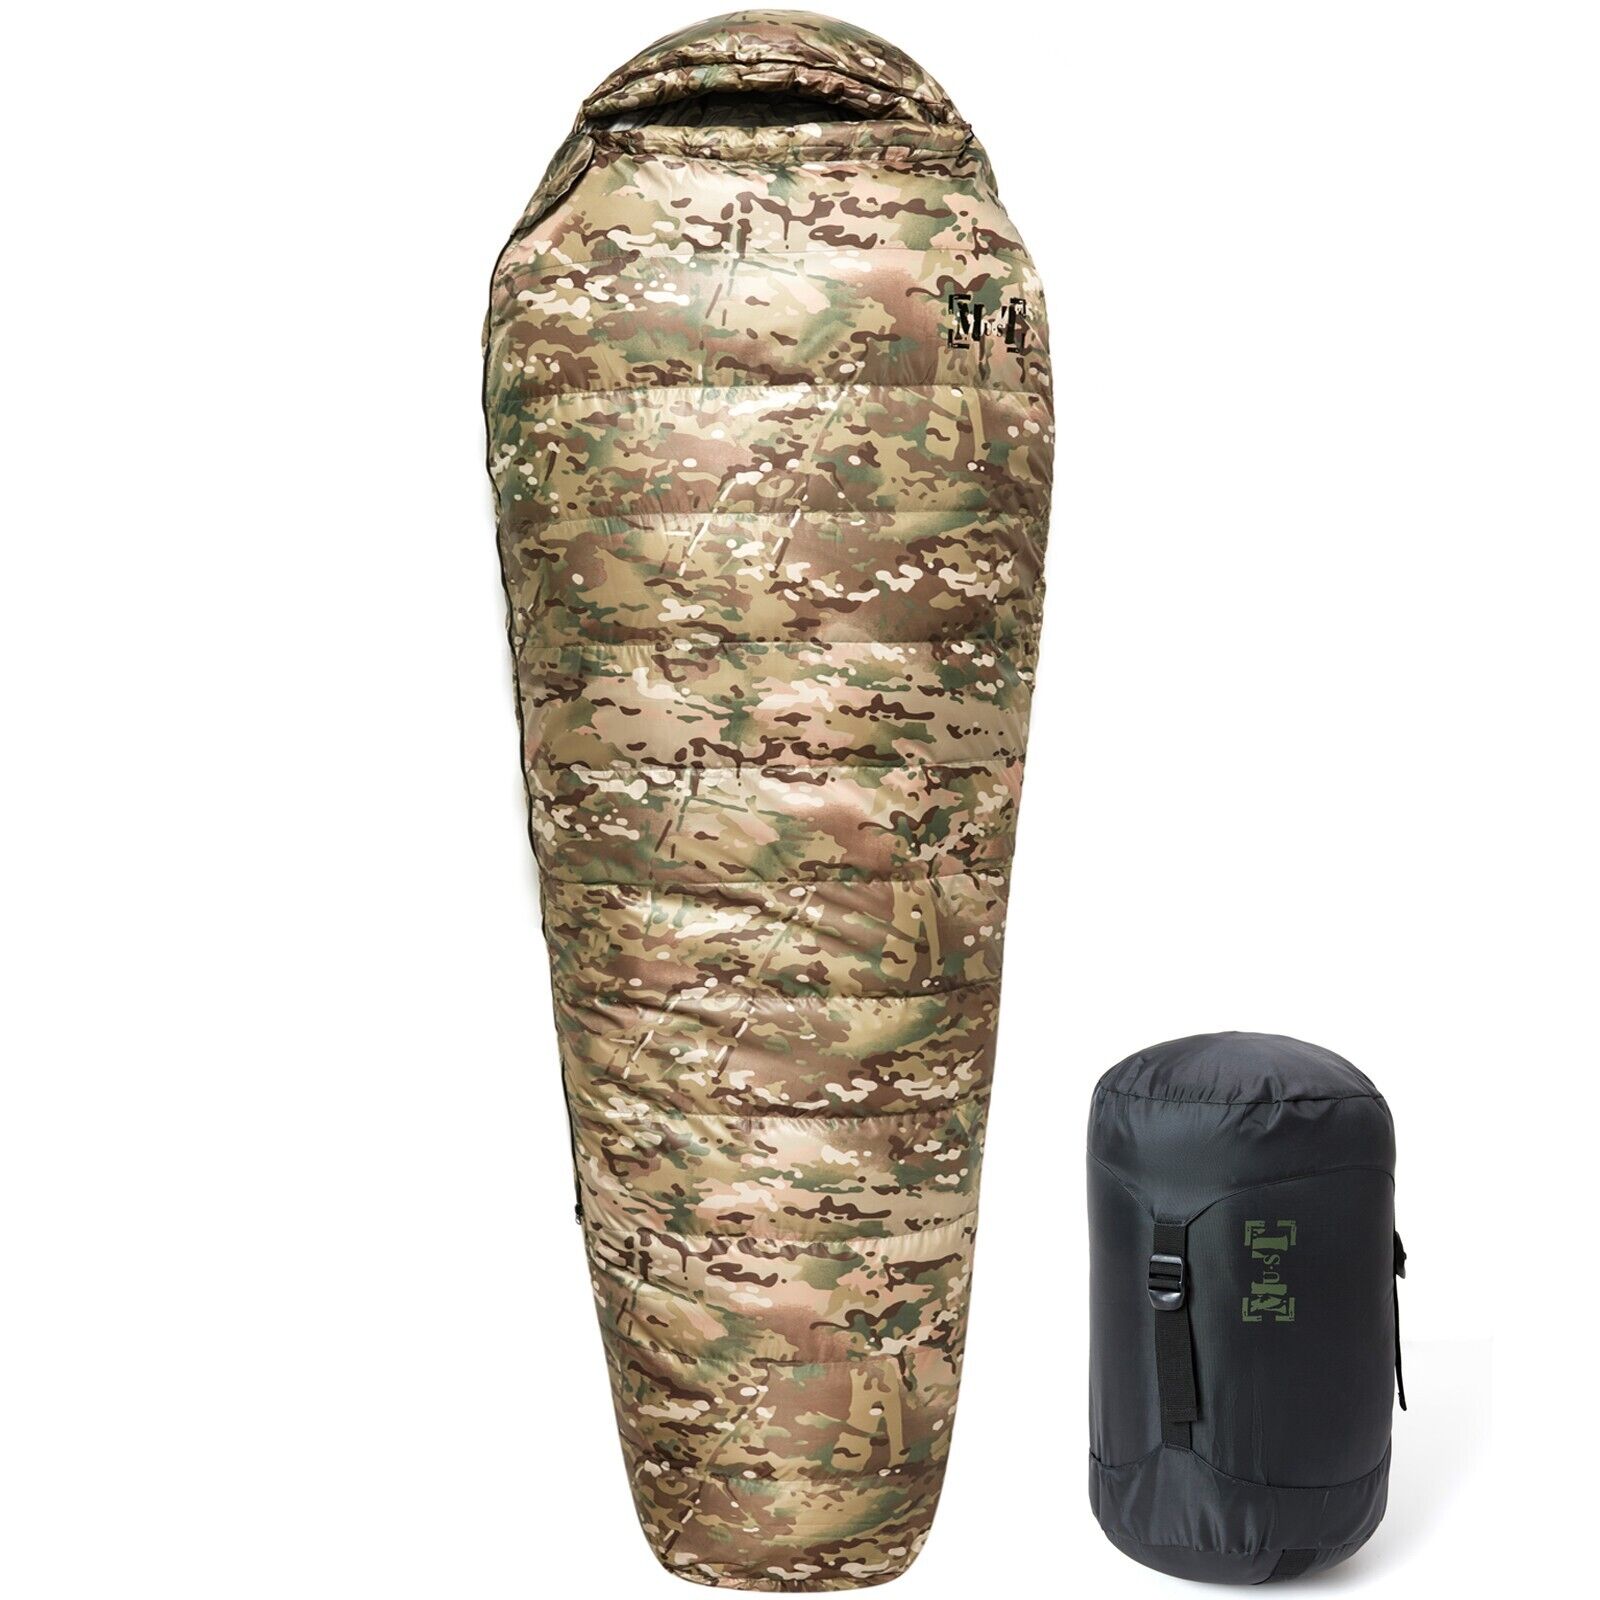 Akmax.cn Military Down Mummy Sleeping Bag for Cold Weather - Multicam